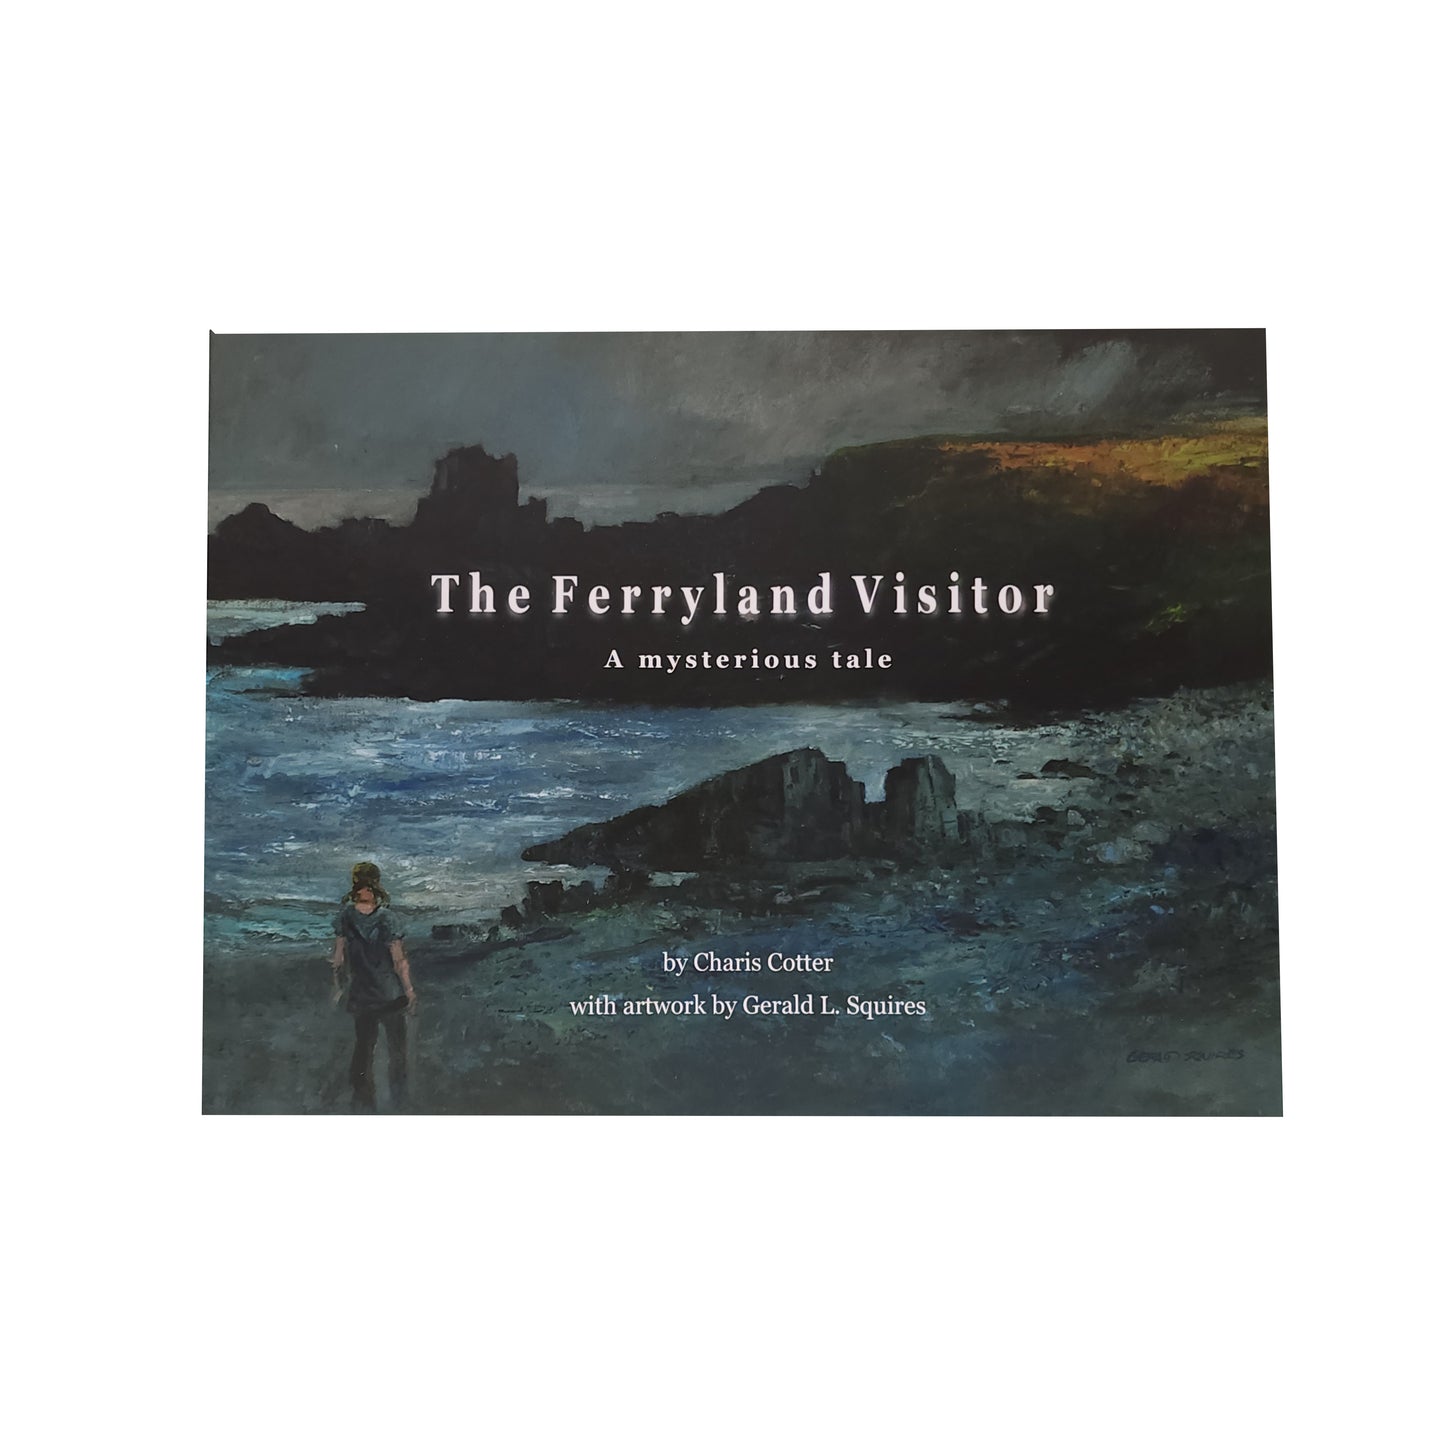 The Ferryland Visitor